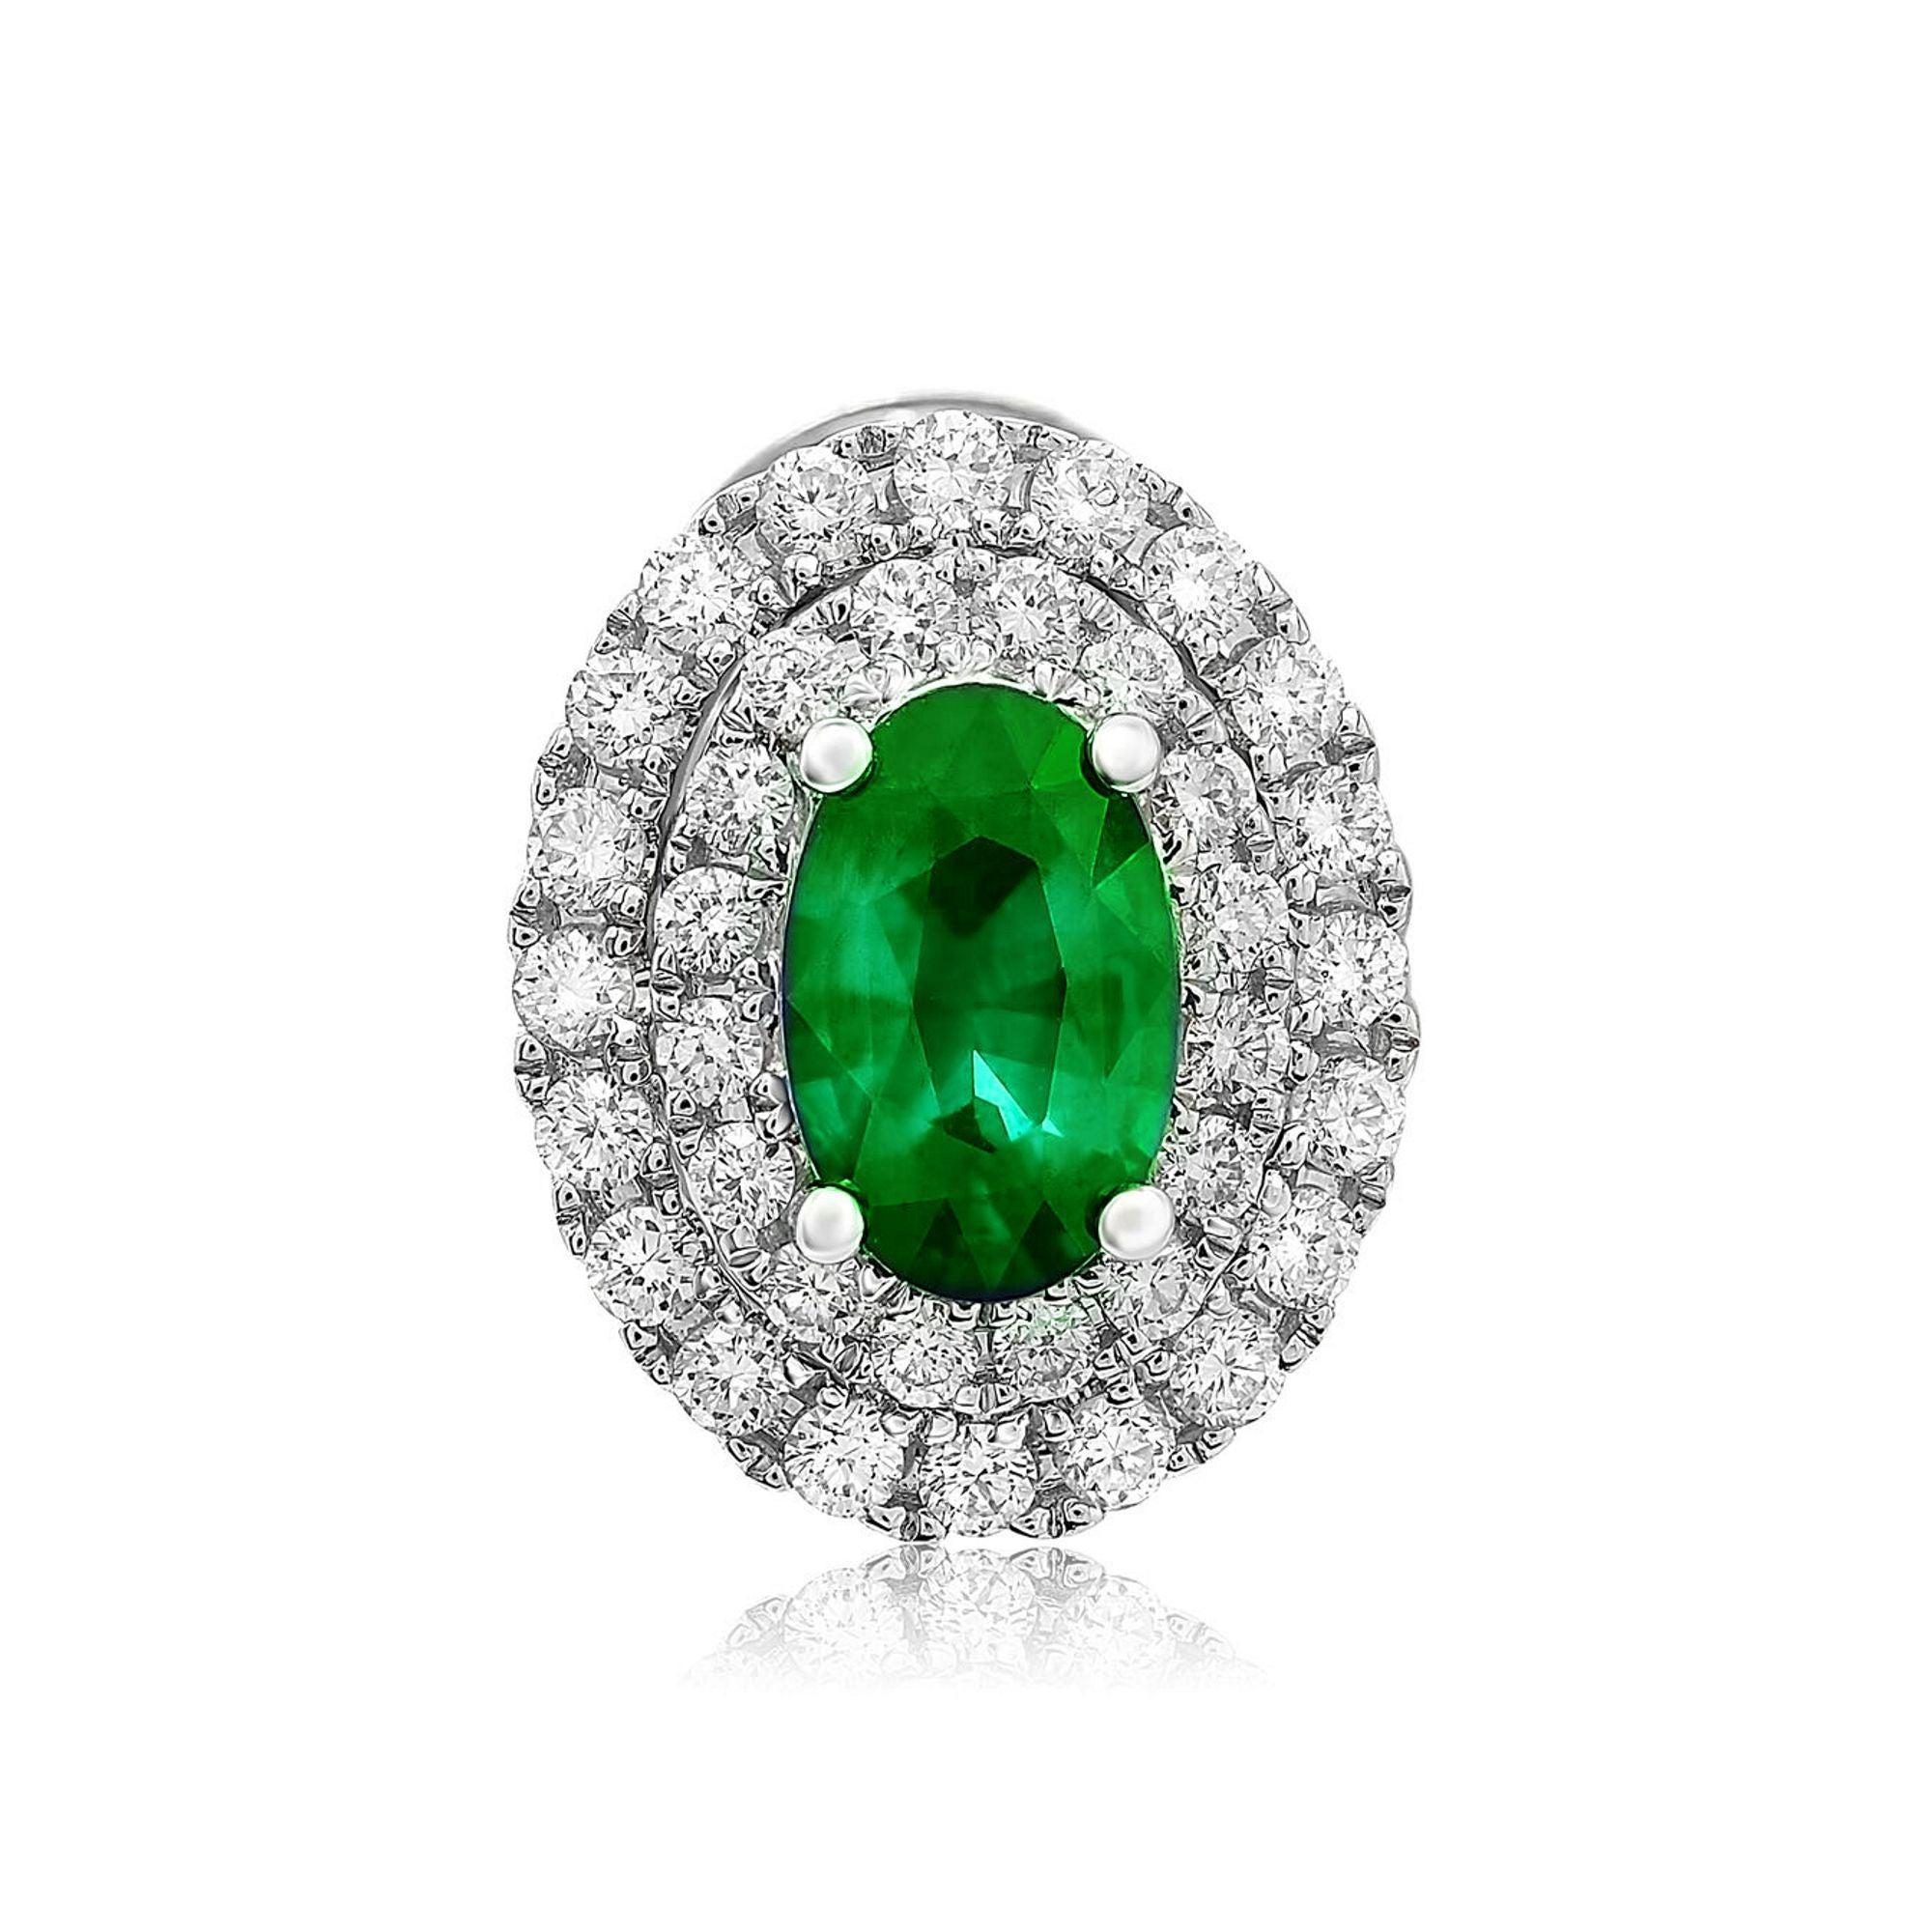 At the center of these eye-catching 18 karat white gold stud earrings rest 0.96 carats of brilliant oval cut emeralds. A sparkling double halo of white diamonds surrounds each center stone with a total weight of 0.50 carats of round cut white